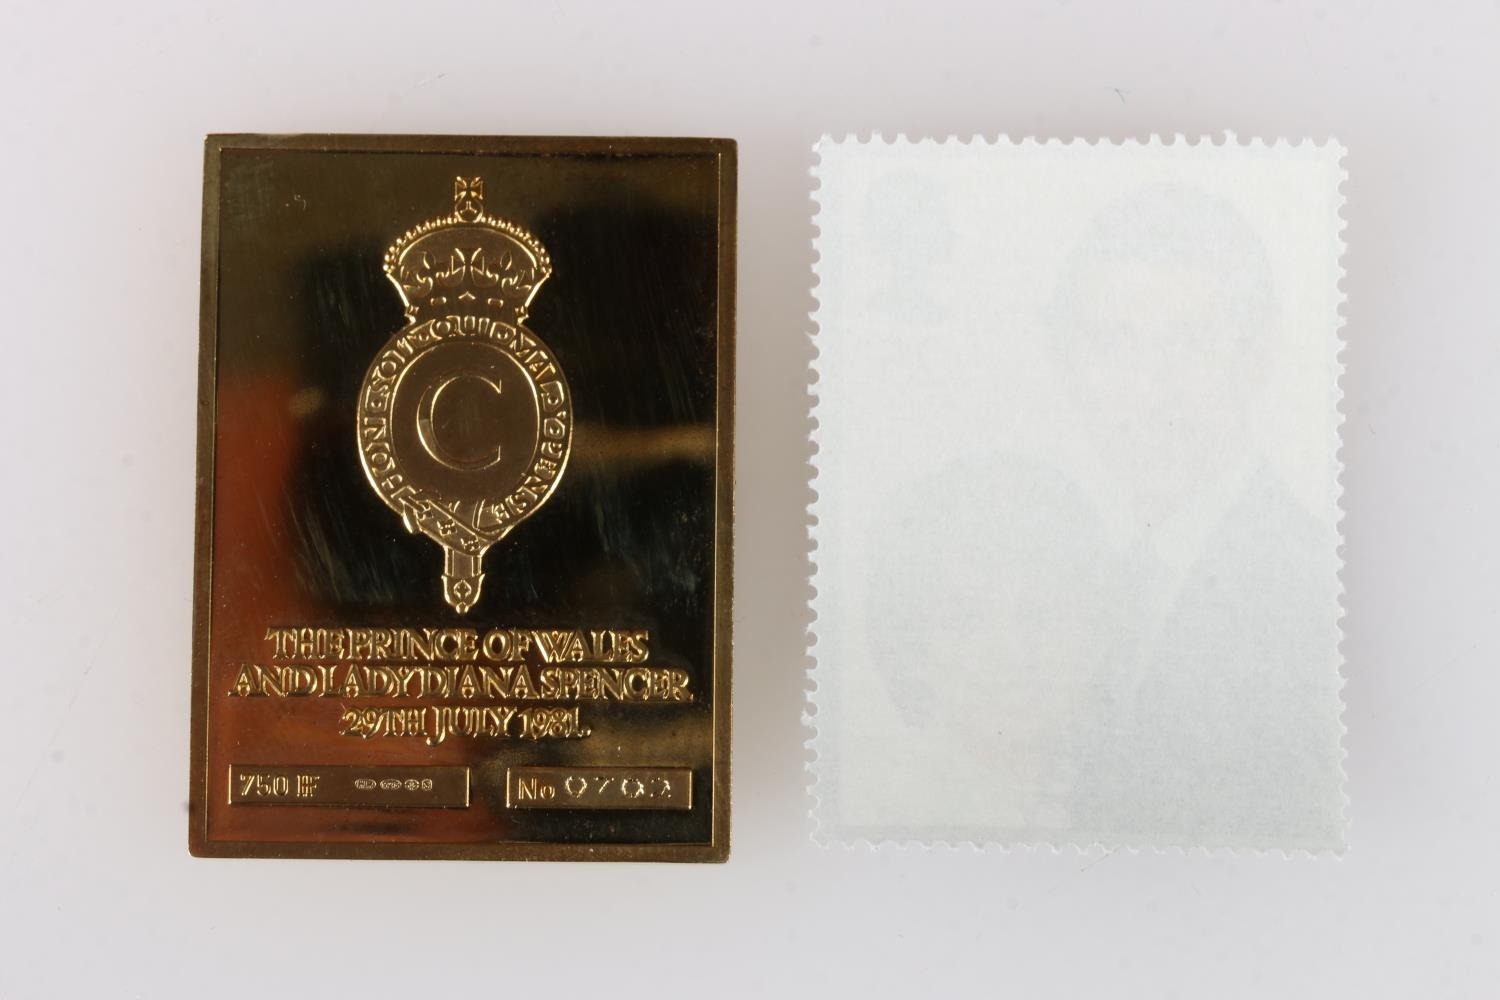 Hallmark Replicas Limited The Coronation Issue 18ct gold proof stamp ingot of Lord Snowdon's - Image 3 of 3